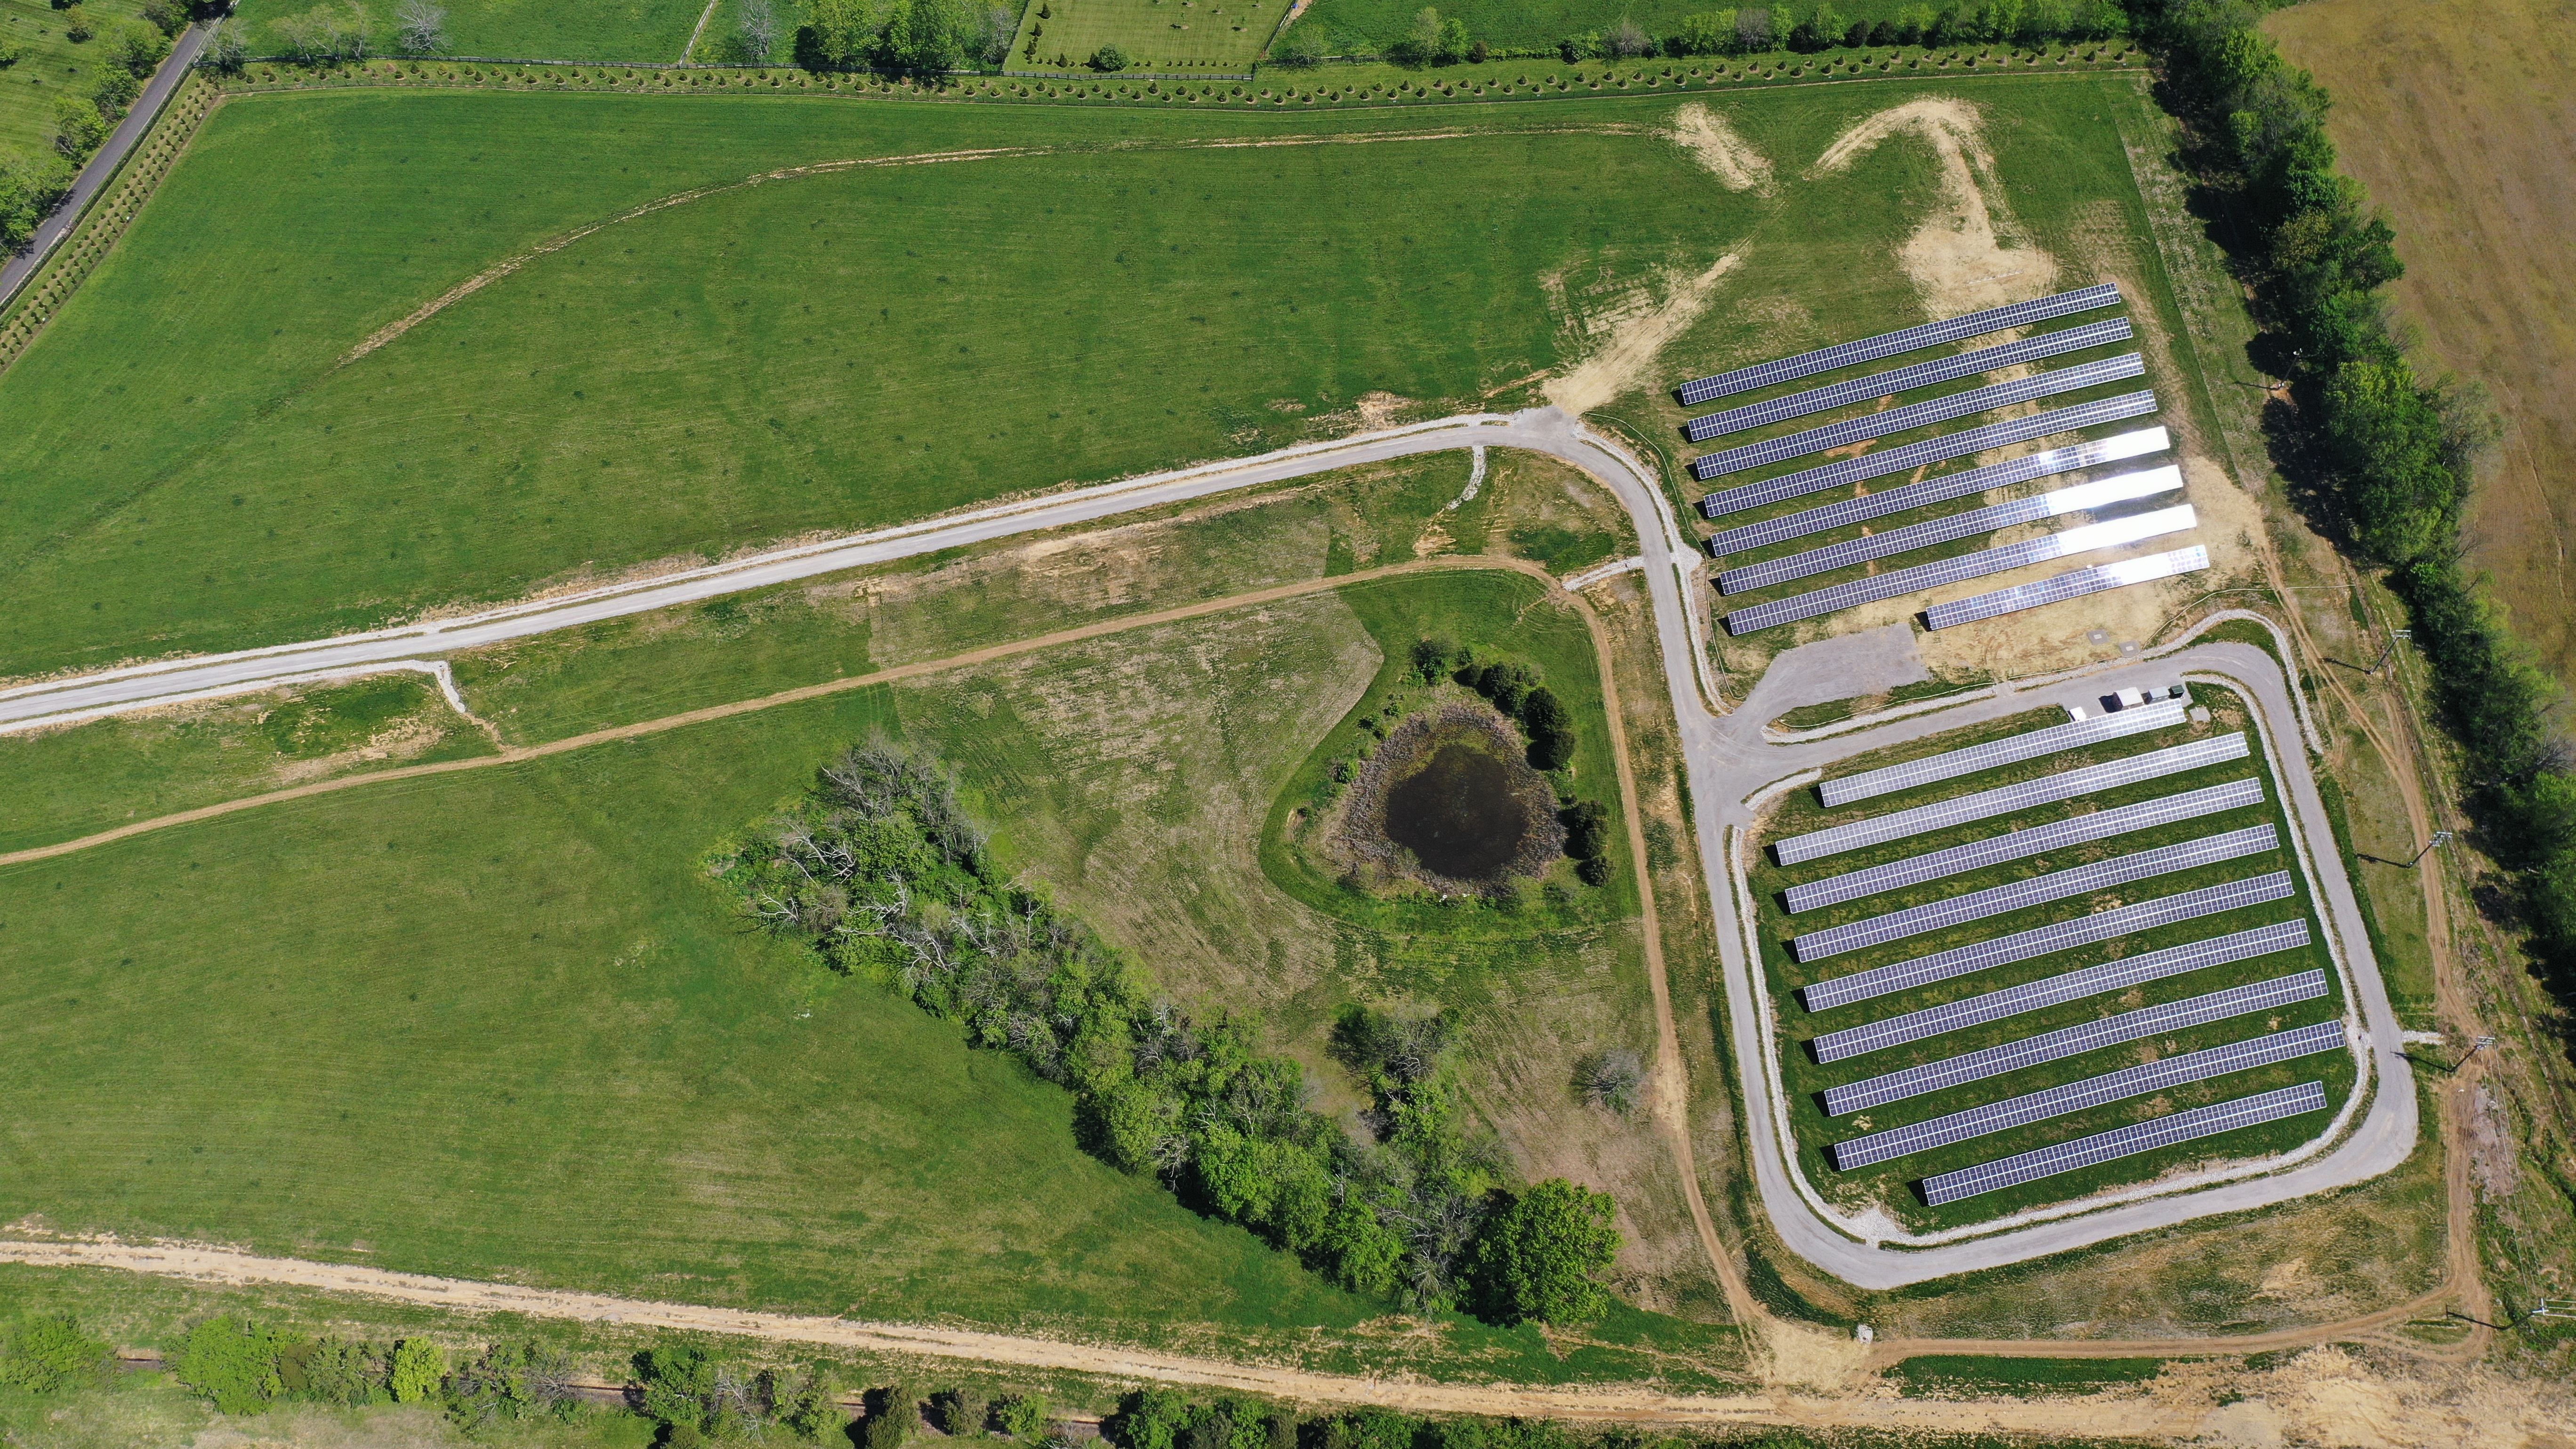 high angle view of solar share array